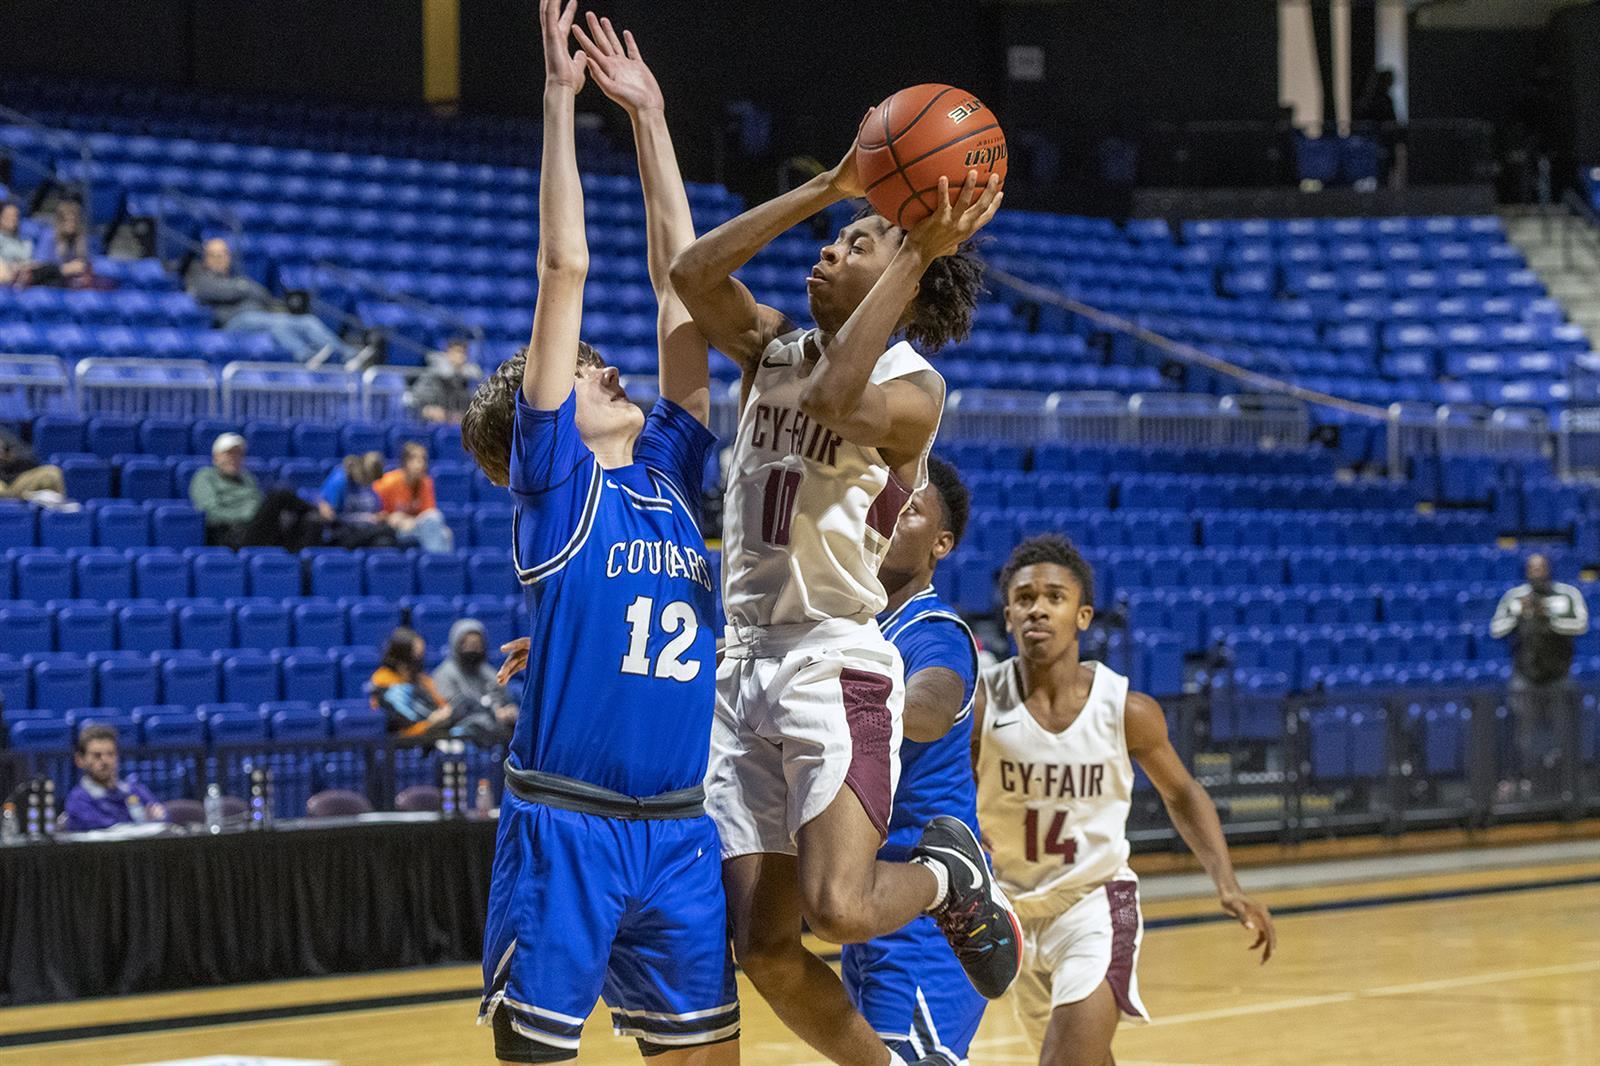 Cy-Fair and Cypress Creek will join the 12 other CFISD boys’ basketball teams in competing in the Cy-Hoops Invitational.